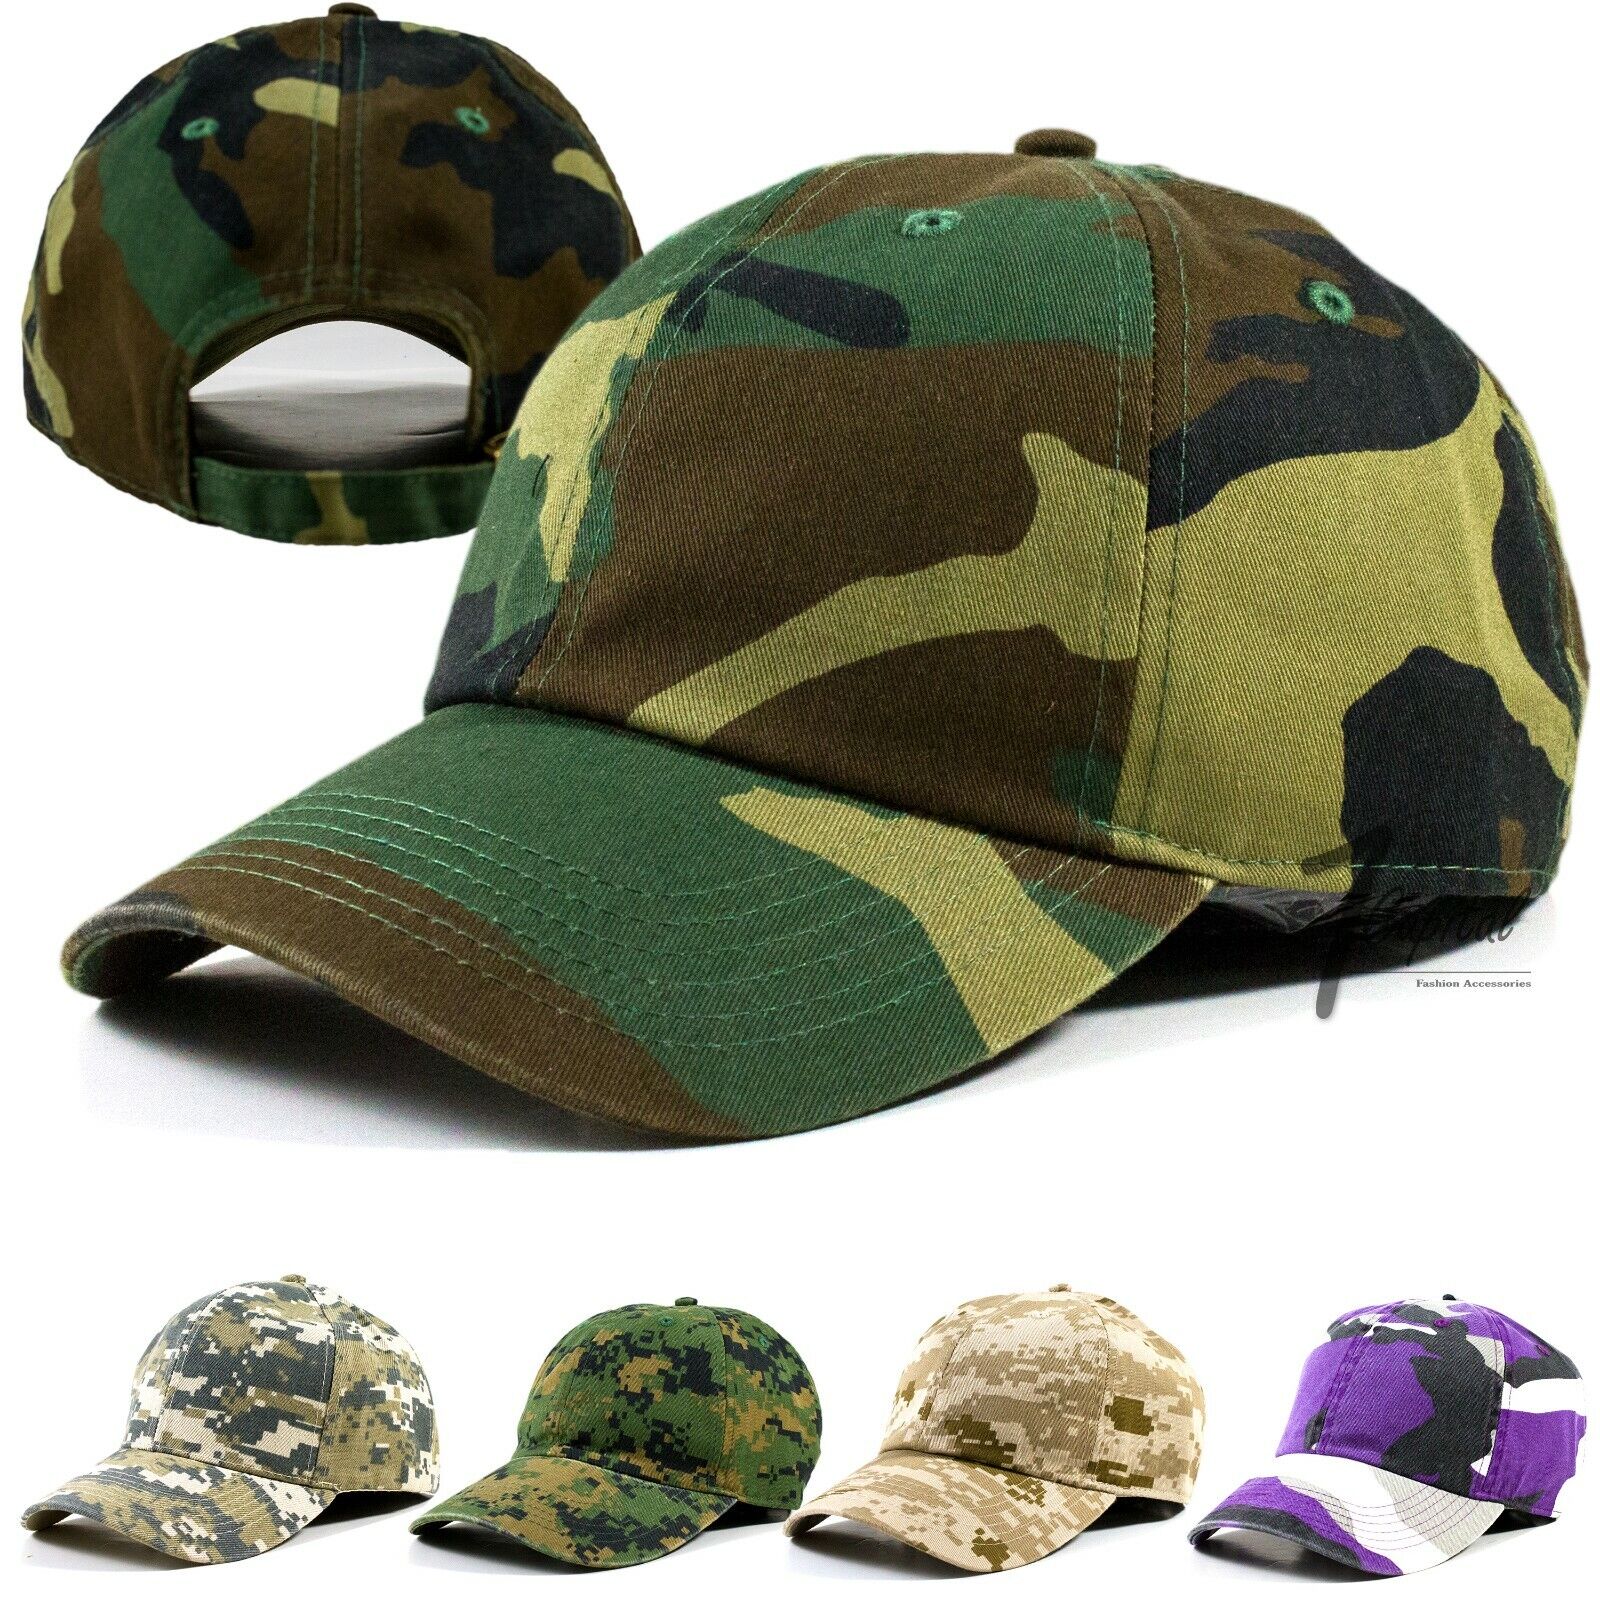 Nike army cap: Nike Store. Shoes, Clothing & Gear.